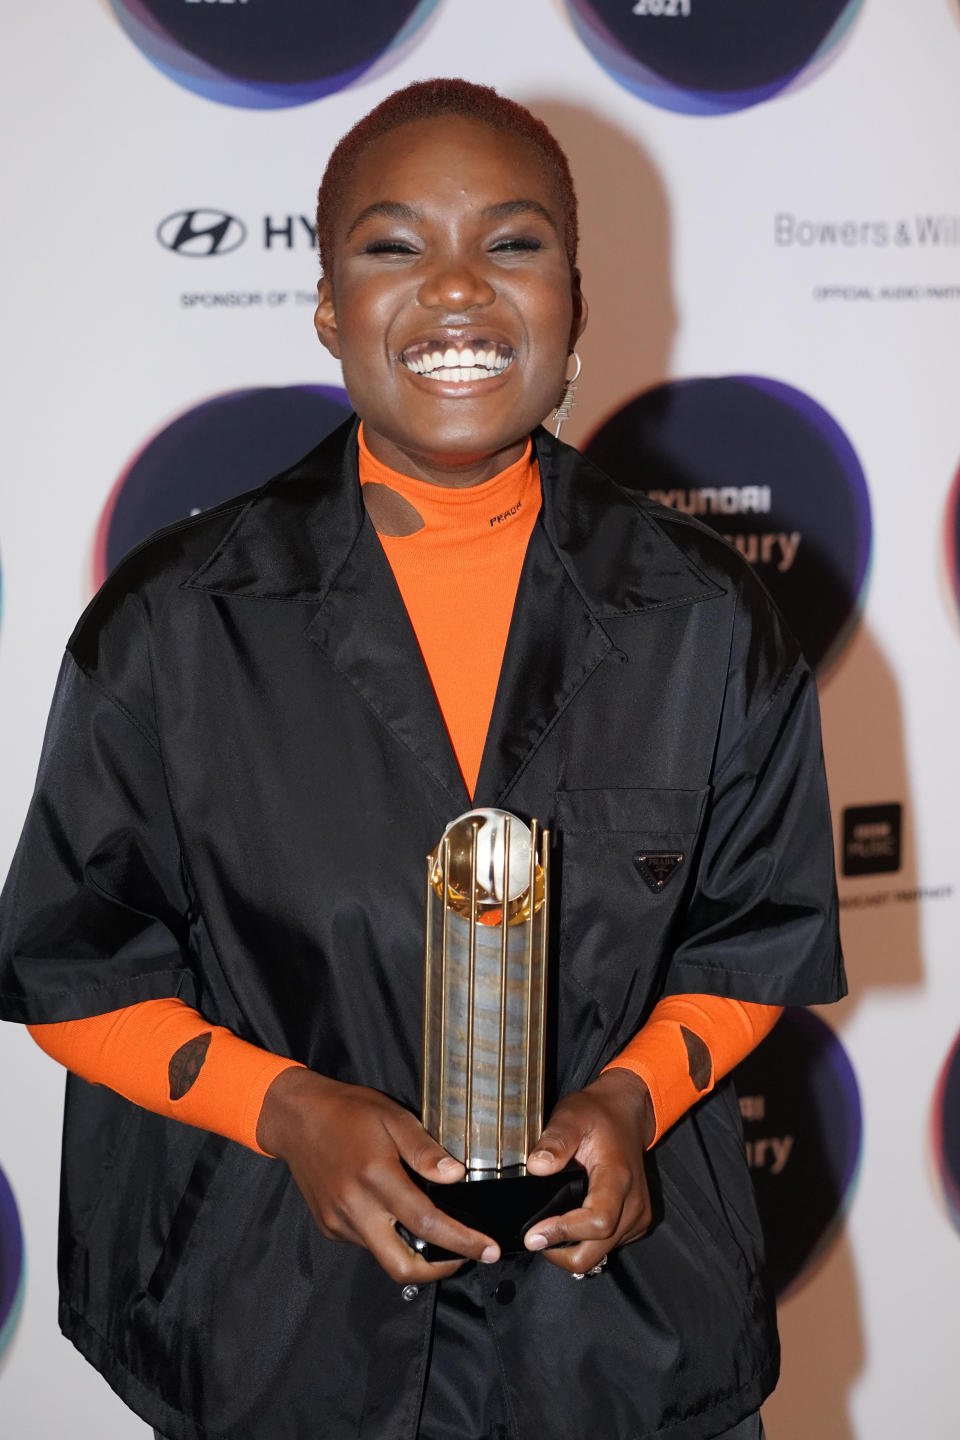 Nominated artist Arlo Parks holding the shortlist trophy during the announcement of the shortlist for the Hyundai Mercury Prize Albums of the Year, at the Langham Hotel in London. Picture date: Thursday July 22, 2021.